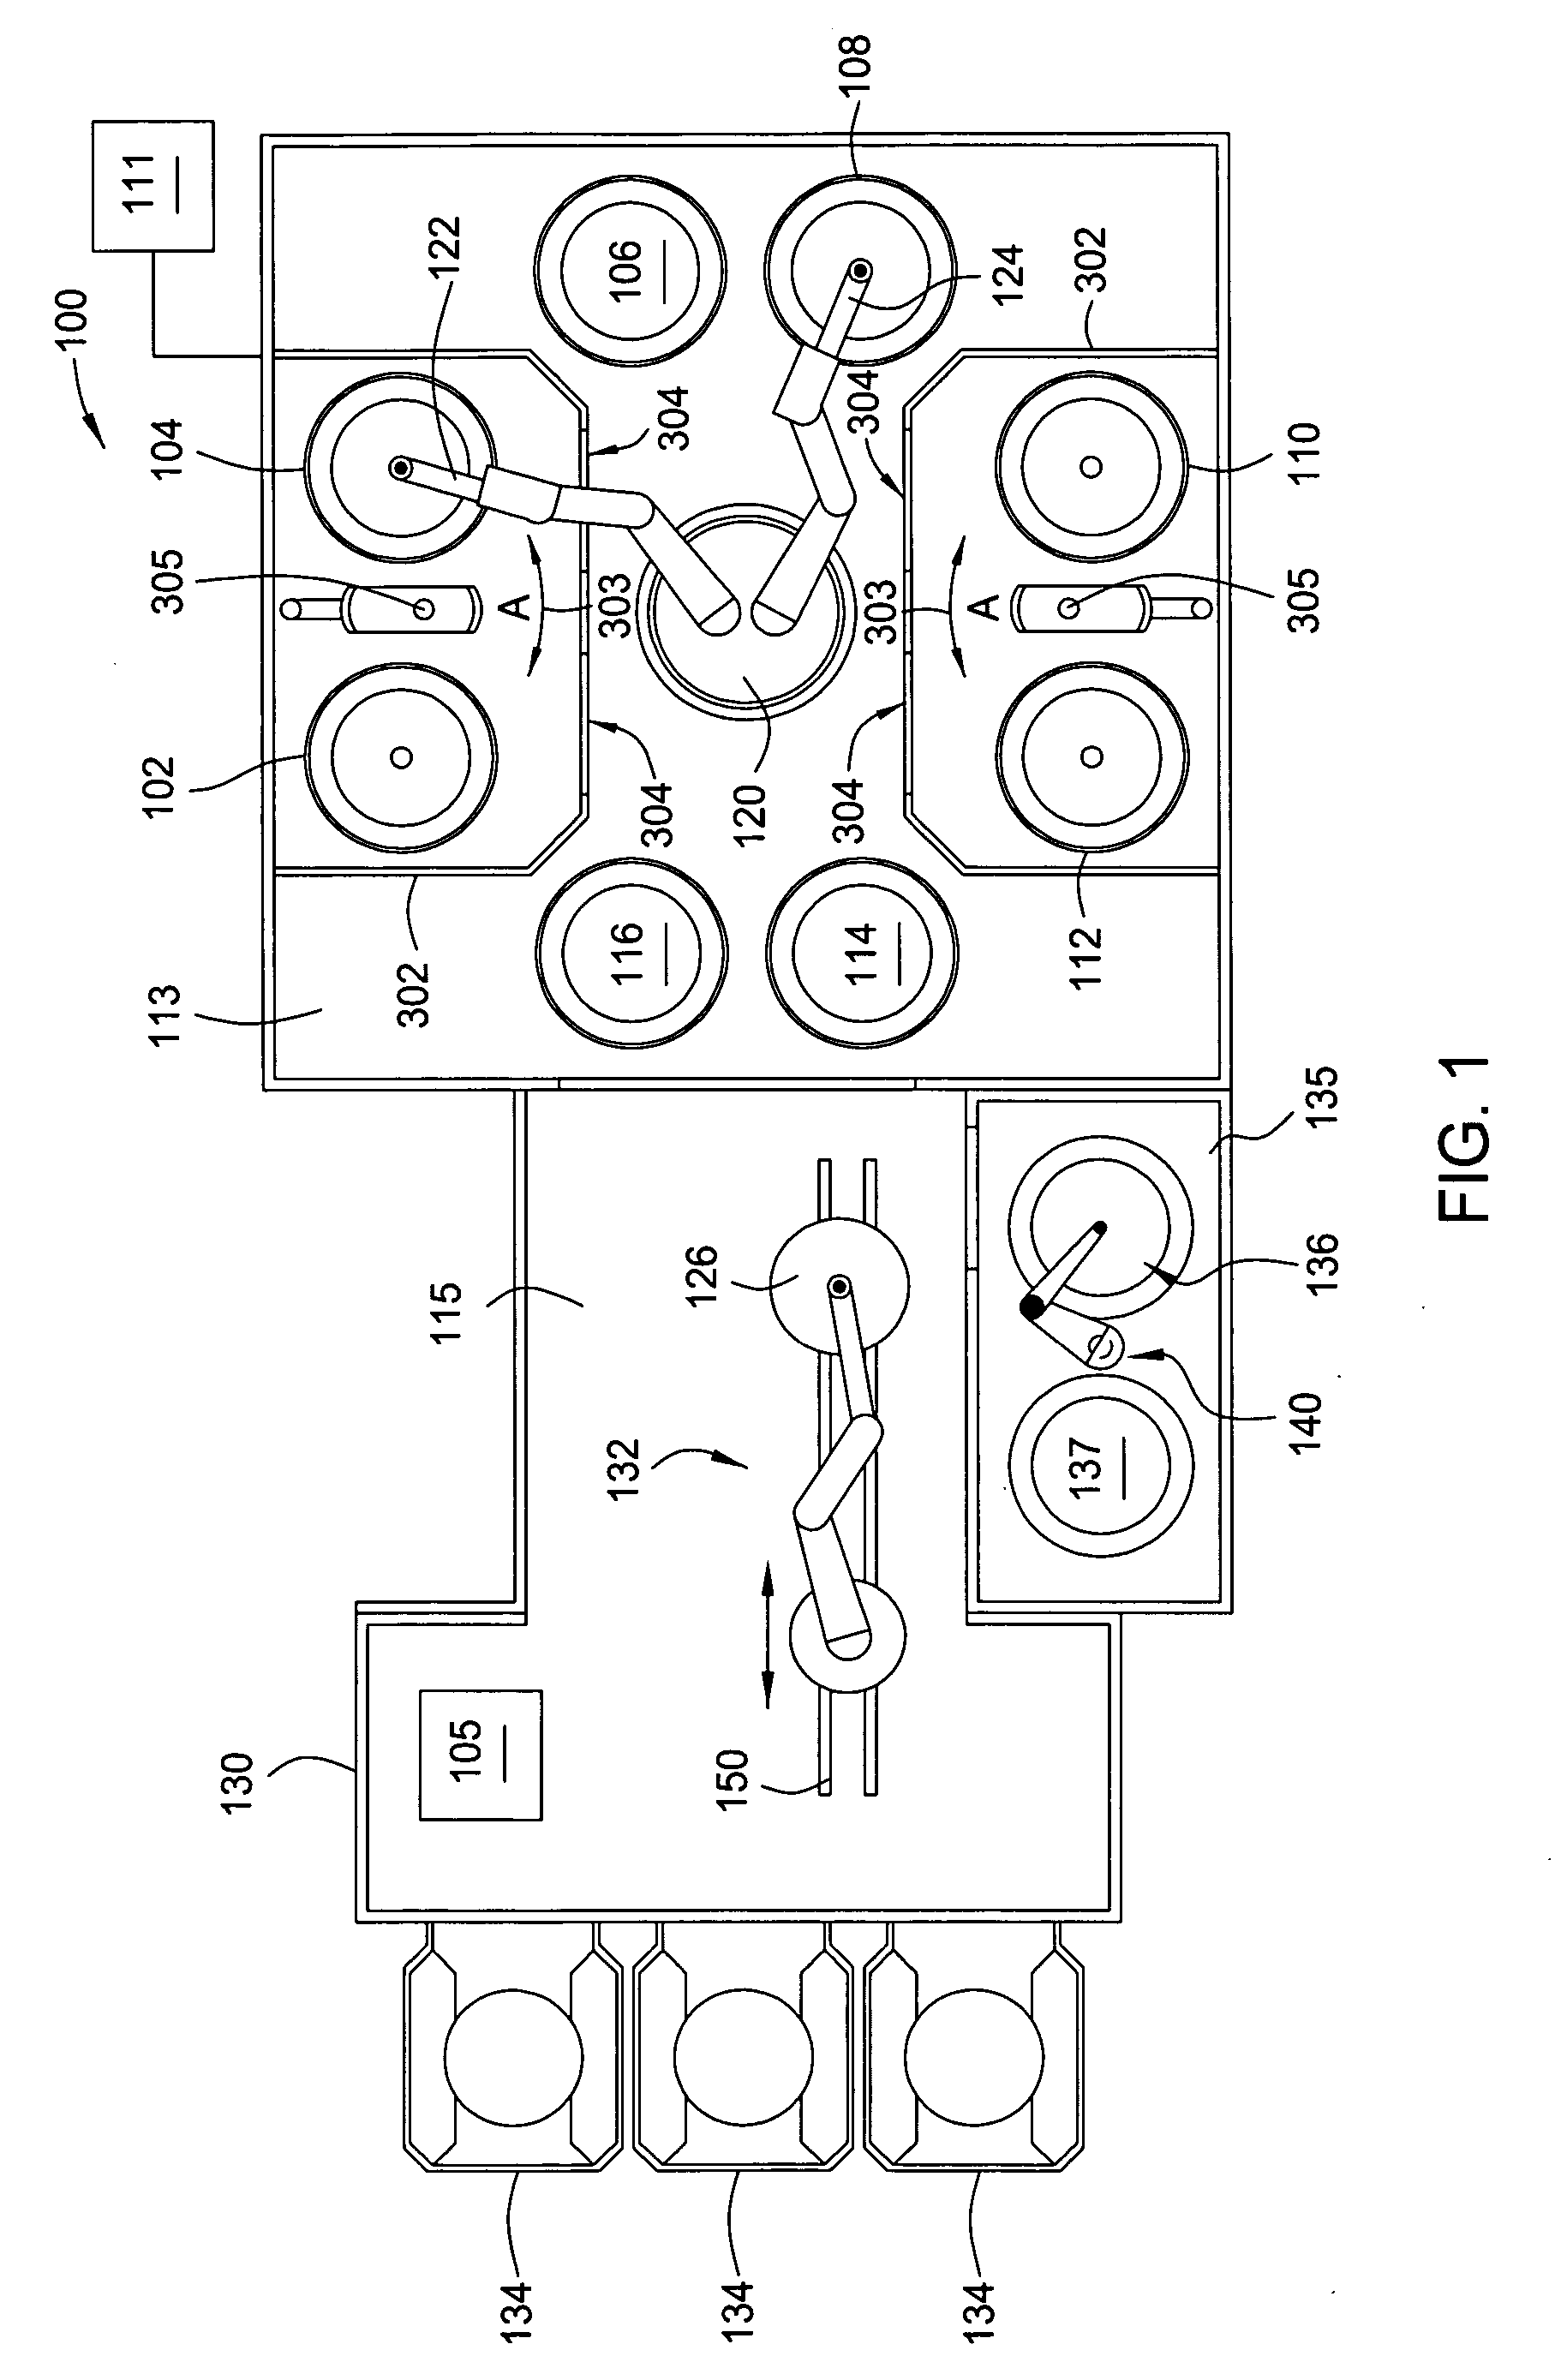 Apparatus for electroless deposition of metals onto semiconductor substrates